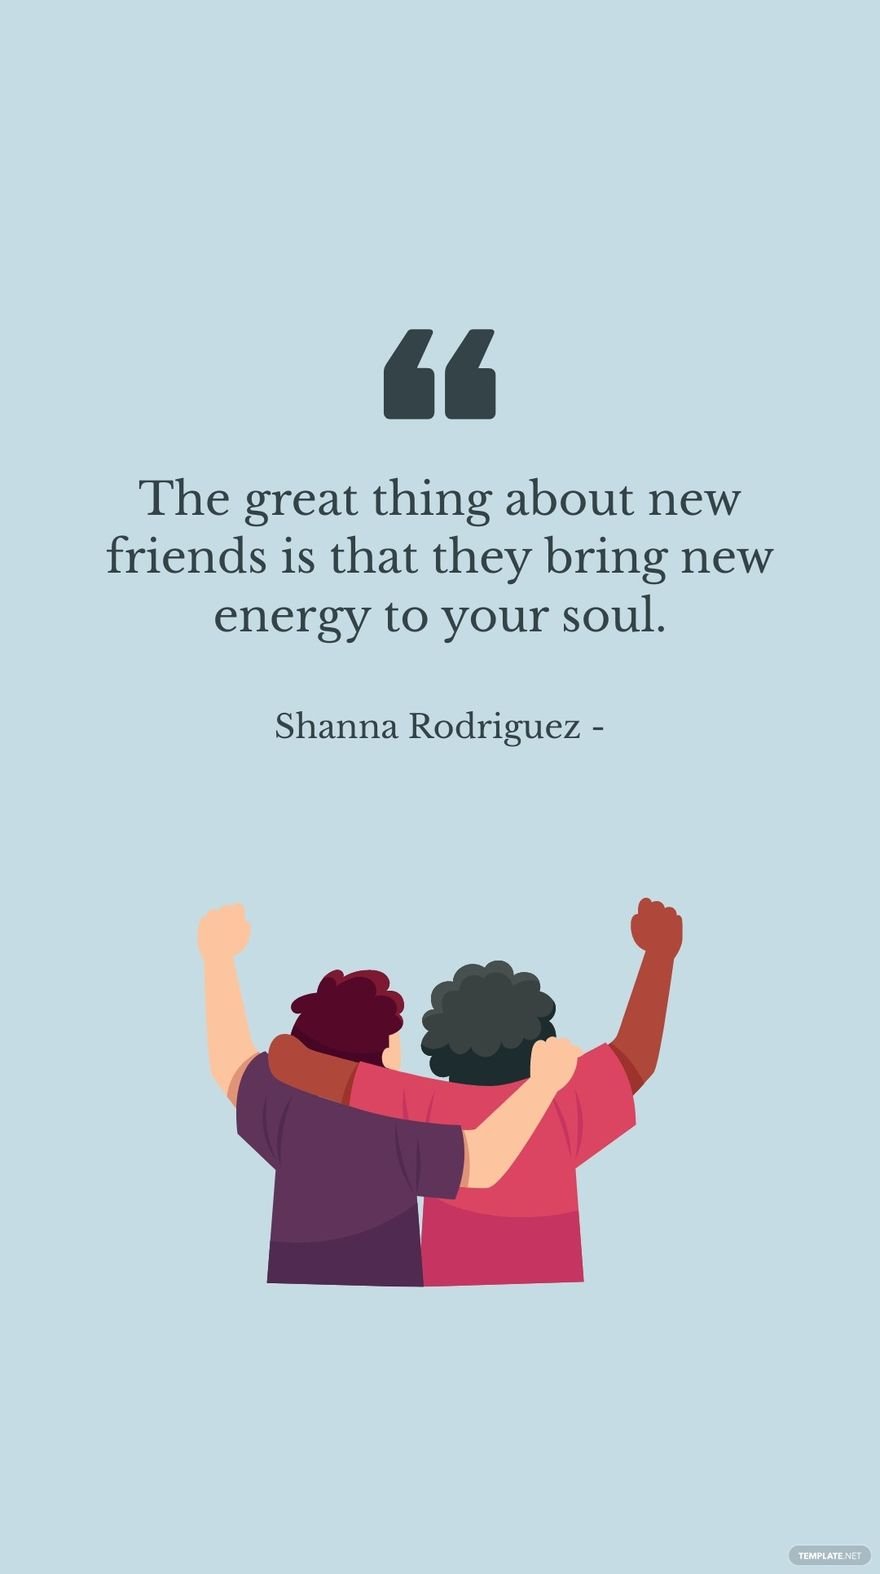 Shanna Rodriguez - The great thing about new friends is that they bring new energy to your soul.